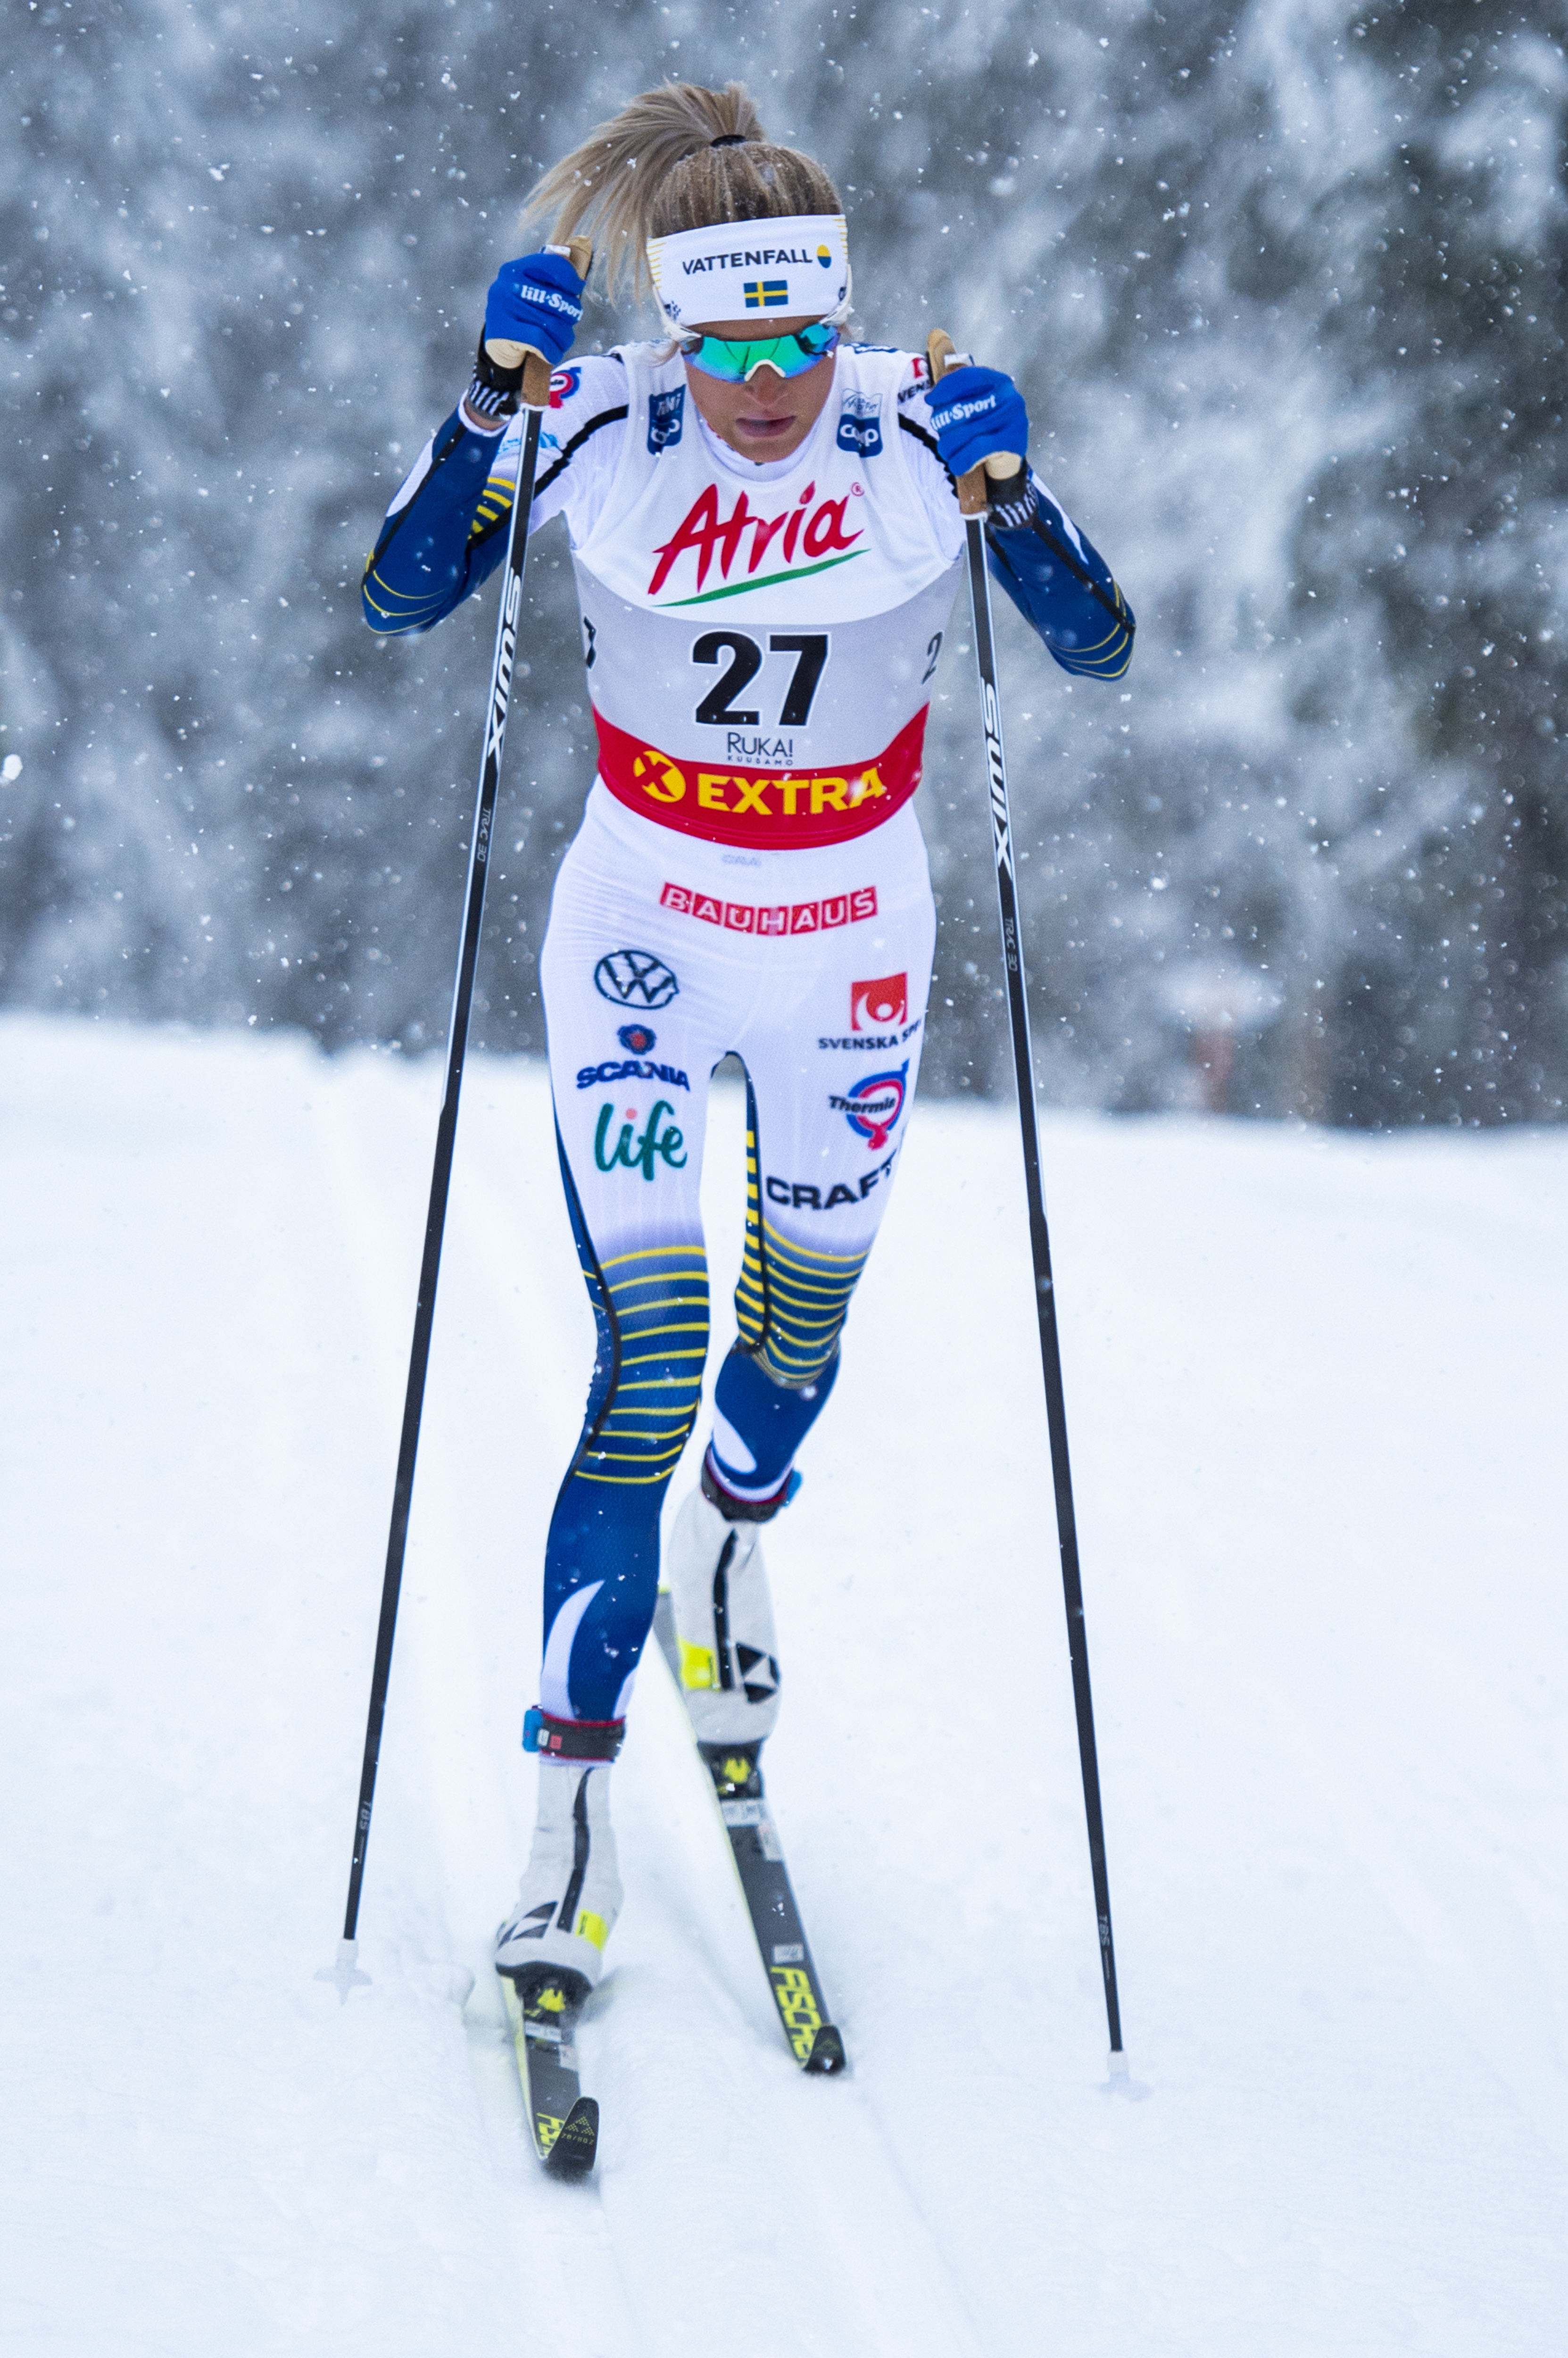 Swedish Junior Champion Frida Karlsson Pulled From Competition After Failing To Meet Health Criteria Fasterskier Com